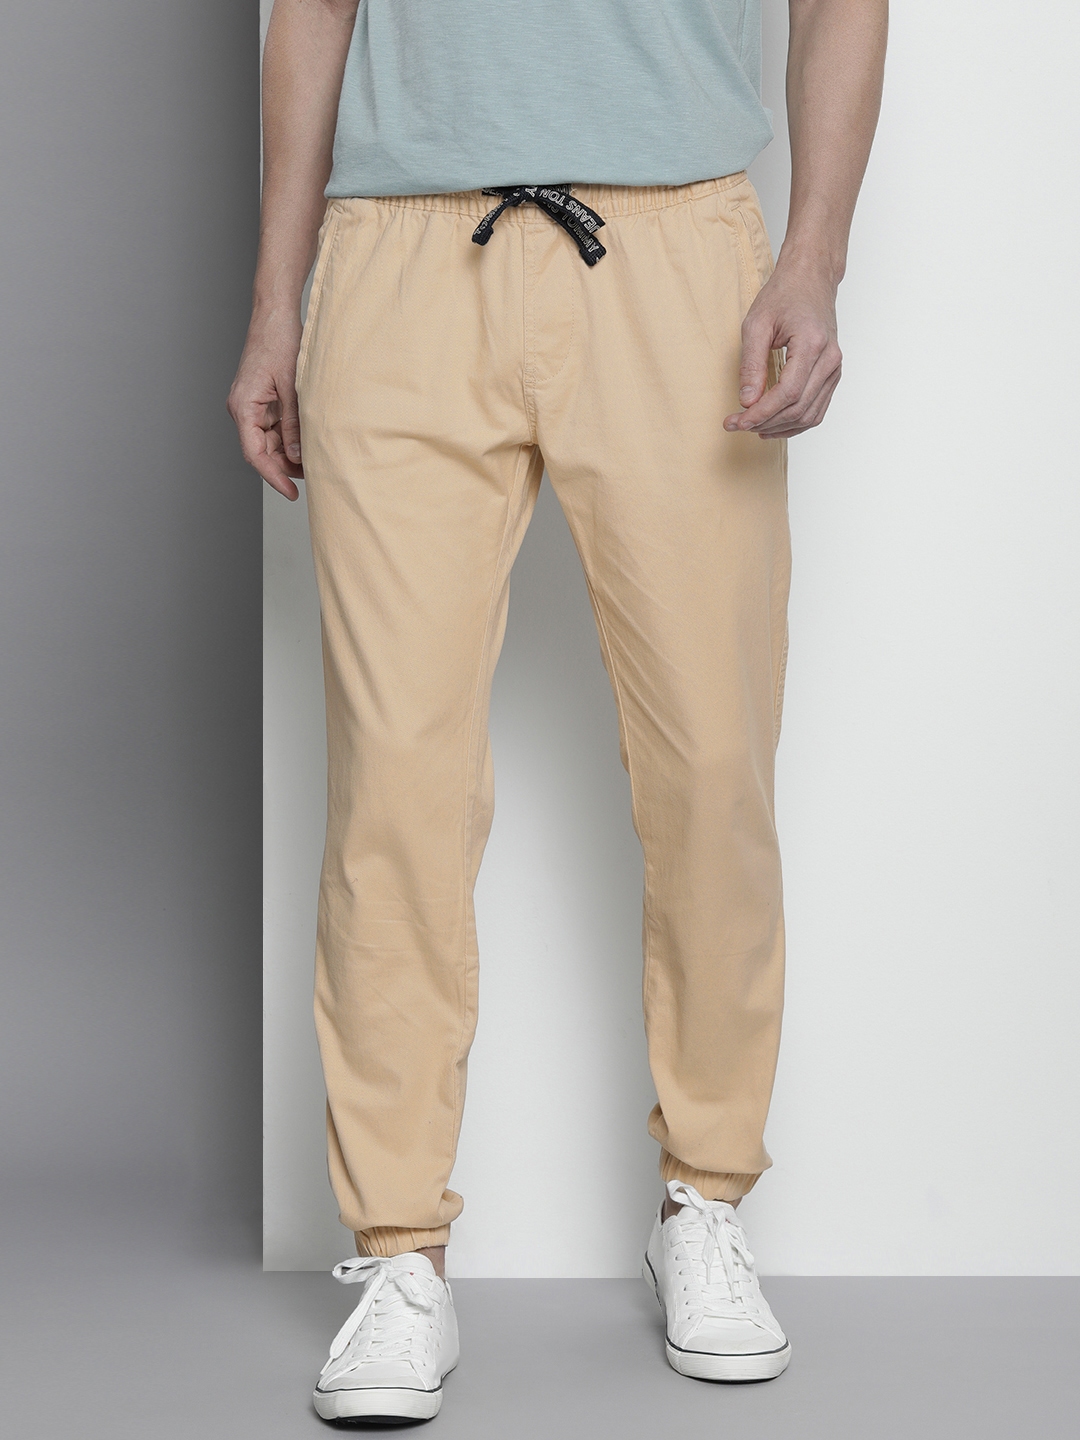 MR P. Tapered Cropped Garment-Dyed Organic Cotton-Twill Trousers